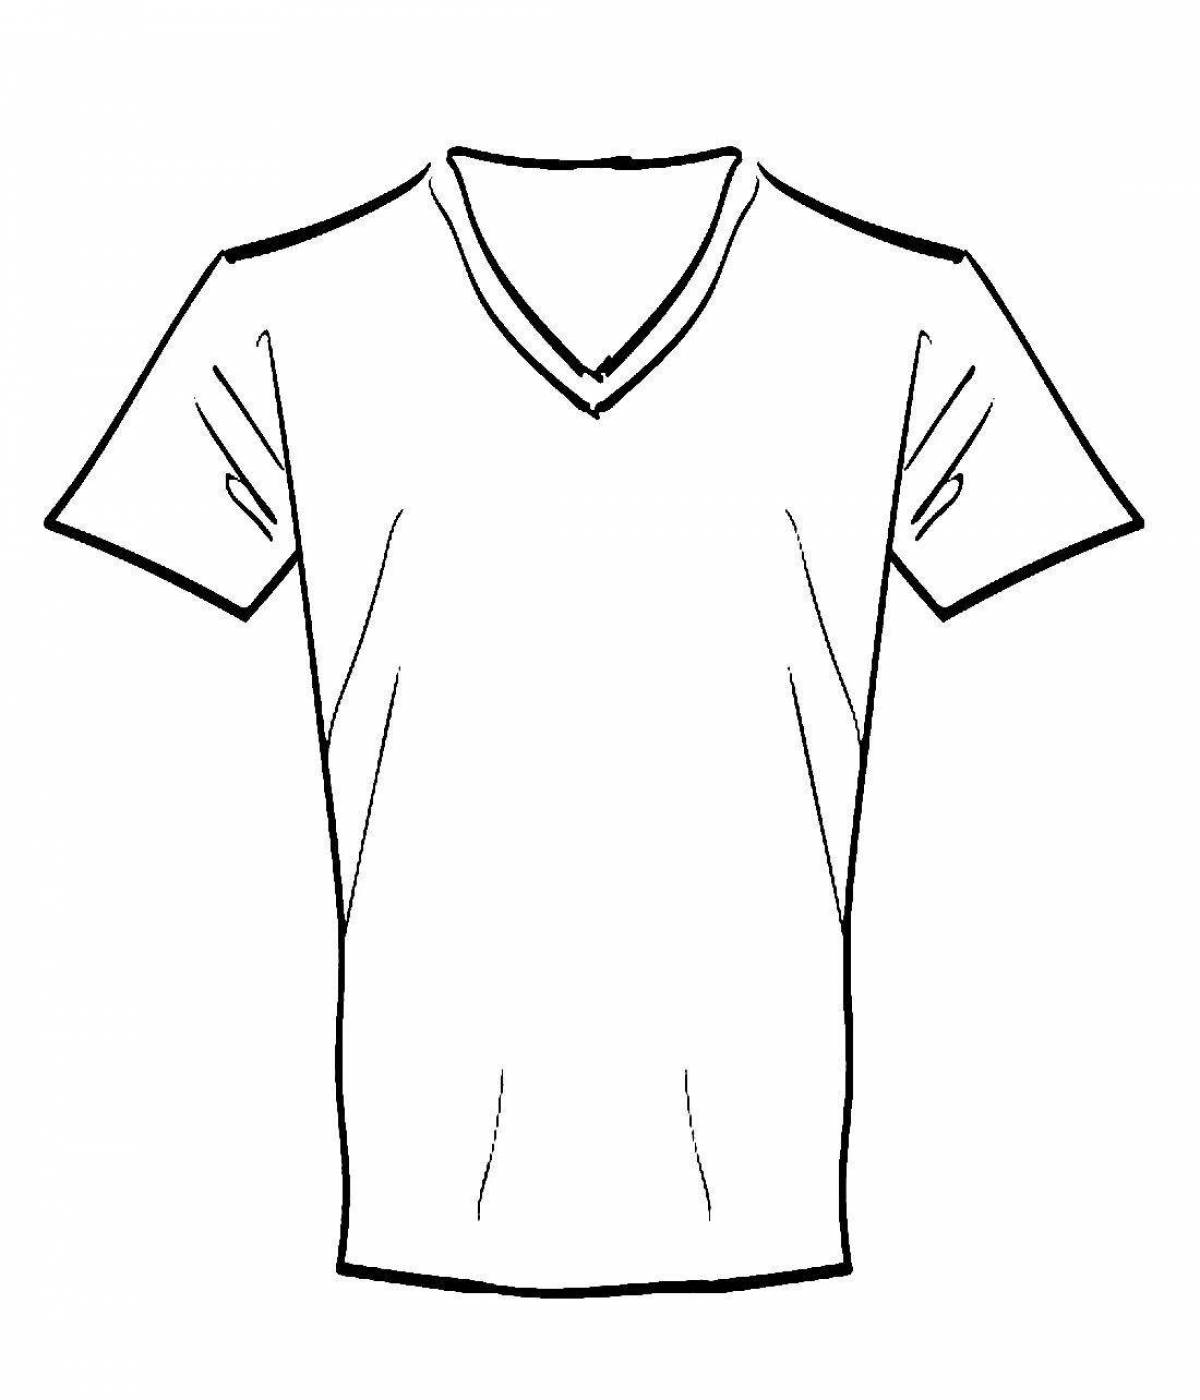 Coloring page energetic boy in a T-shirt